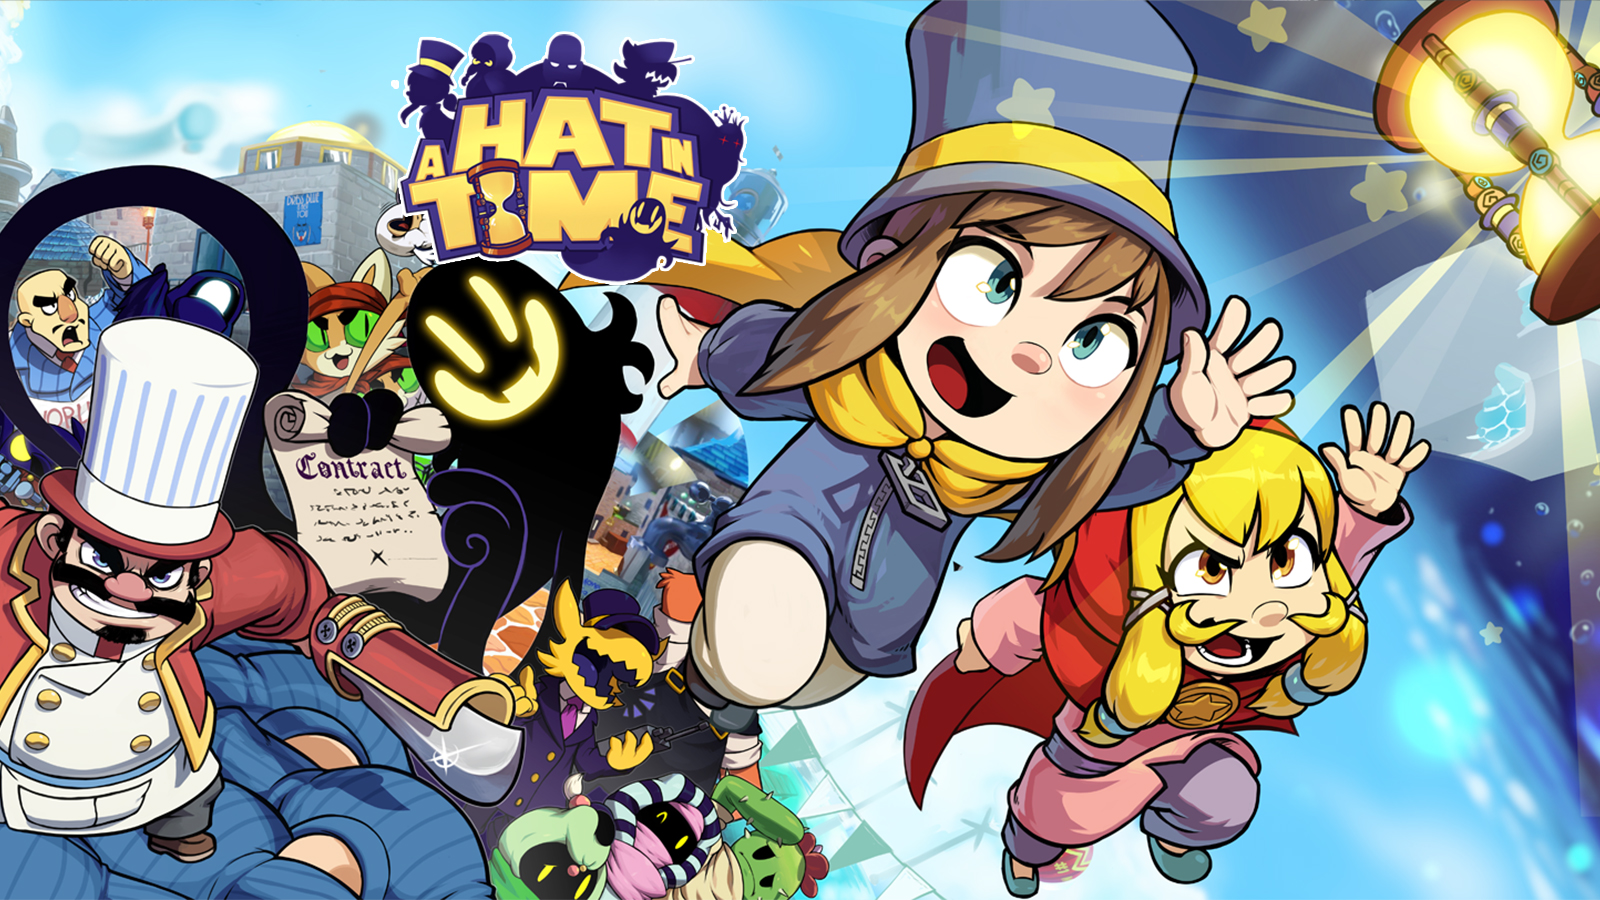 A Hat in Time on X: A Hat in Time has sold over ONE MILLION COPIES!!! We  at Gears for Breakfast are forever thankful to the amazing fans who made  this possible!